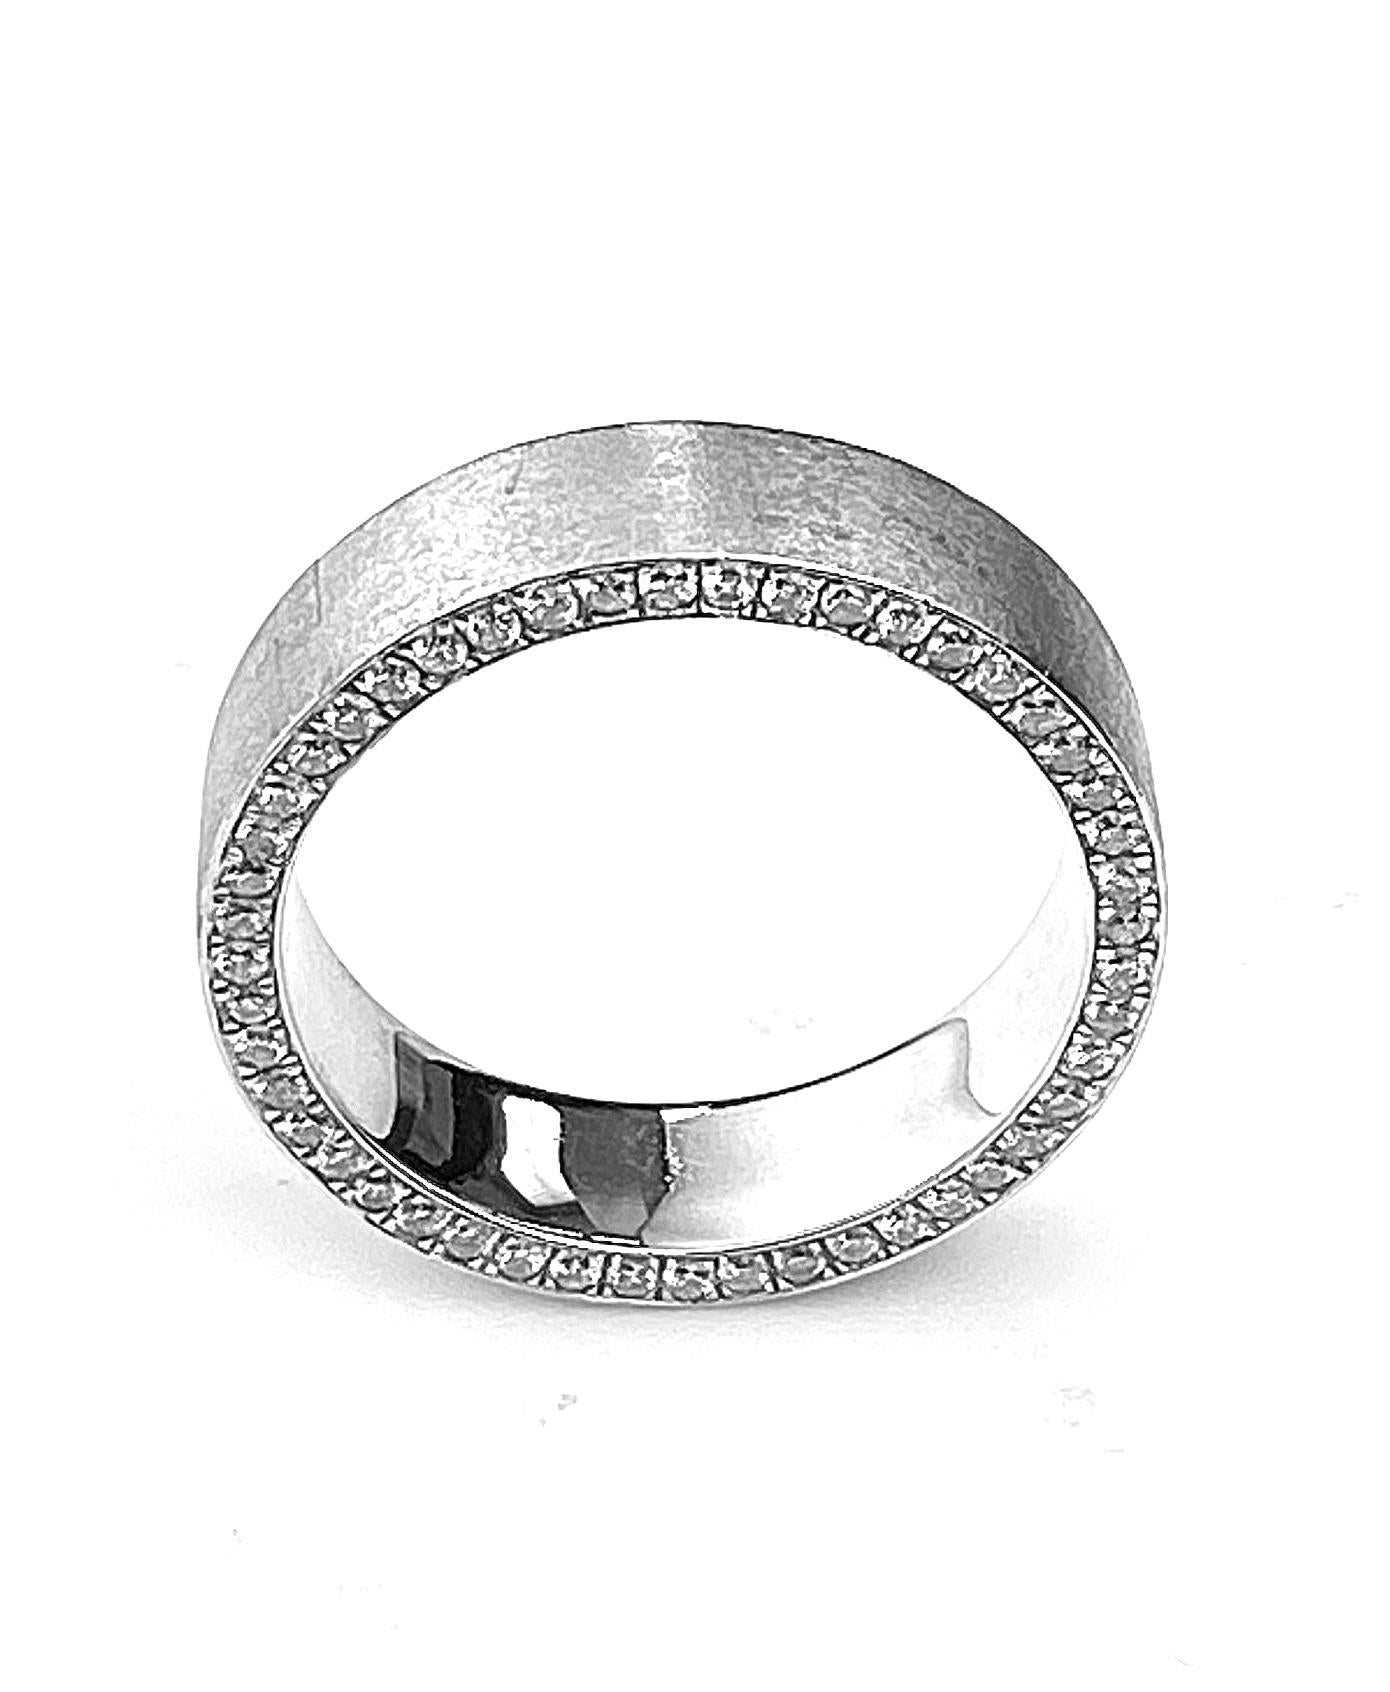 Men's wedding band in 18kt white gold, set with 0.94ct white diamonds on both ring sides on flat edges, 0.94ct total. Diamonds are F/G colour and VS/SI1 clarity.  Ring size 9 3/4. Finished on top surface with light satin finish.